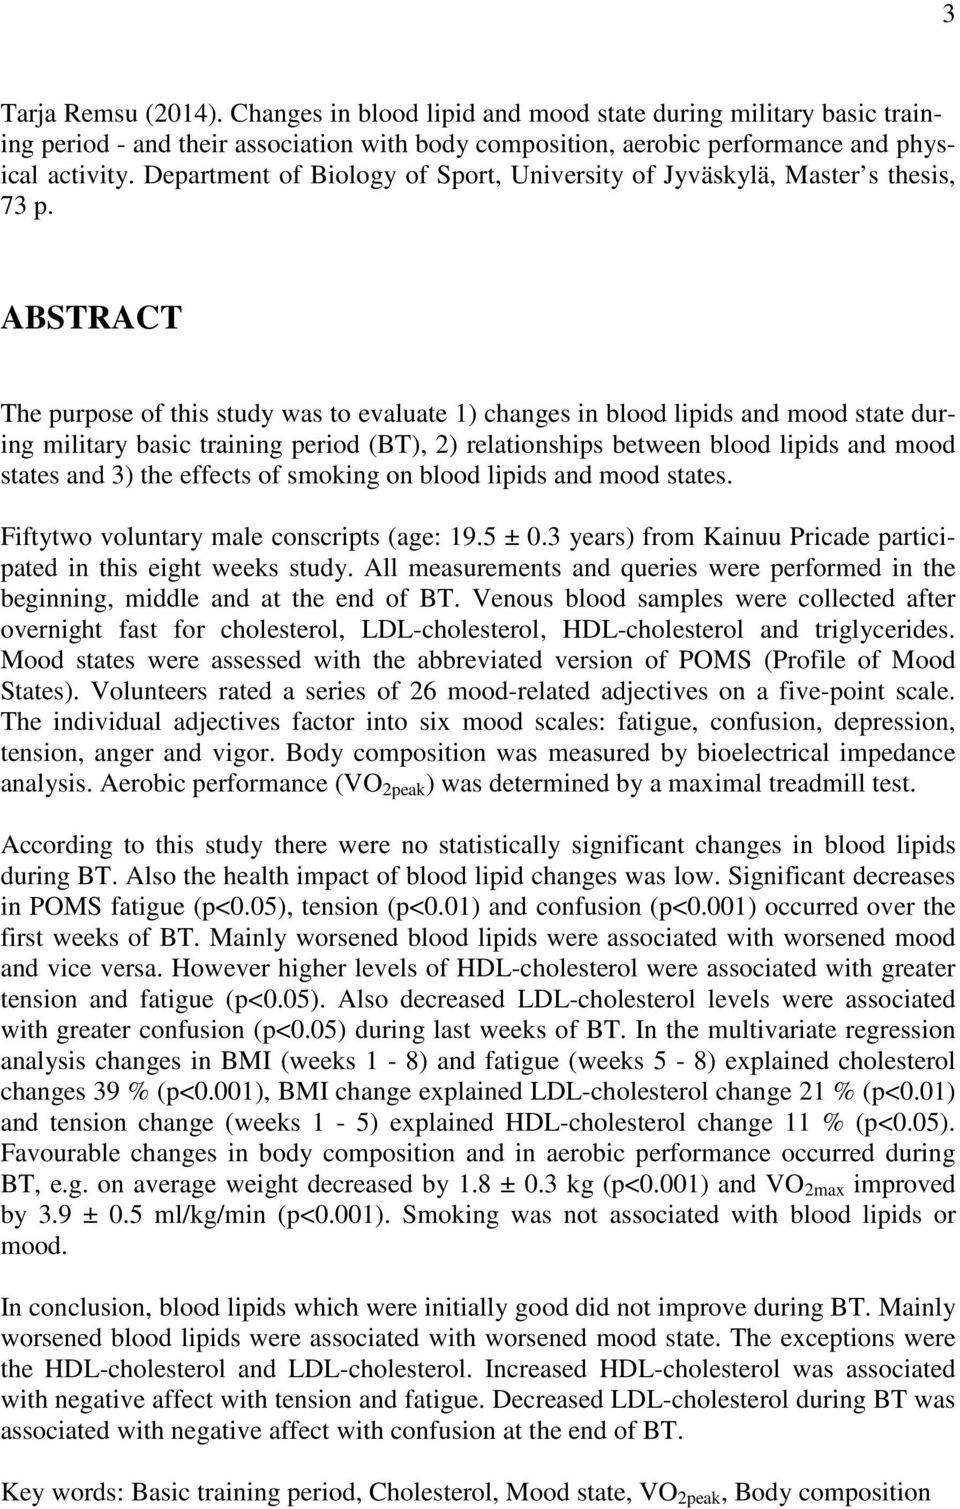 ABSTRACT The purpose of this study was to evaluate 1) changes in blood lipids and mood state during military basic training period (BT), 2) relationships between blood lipids and mood states and 3)